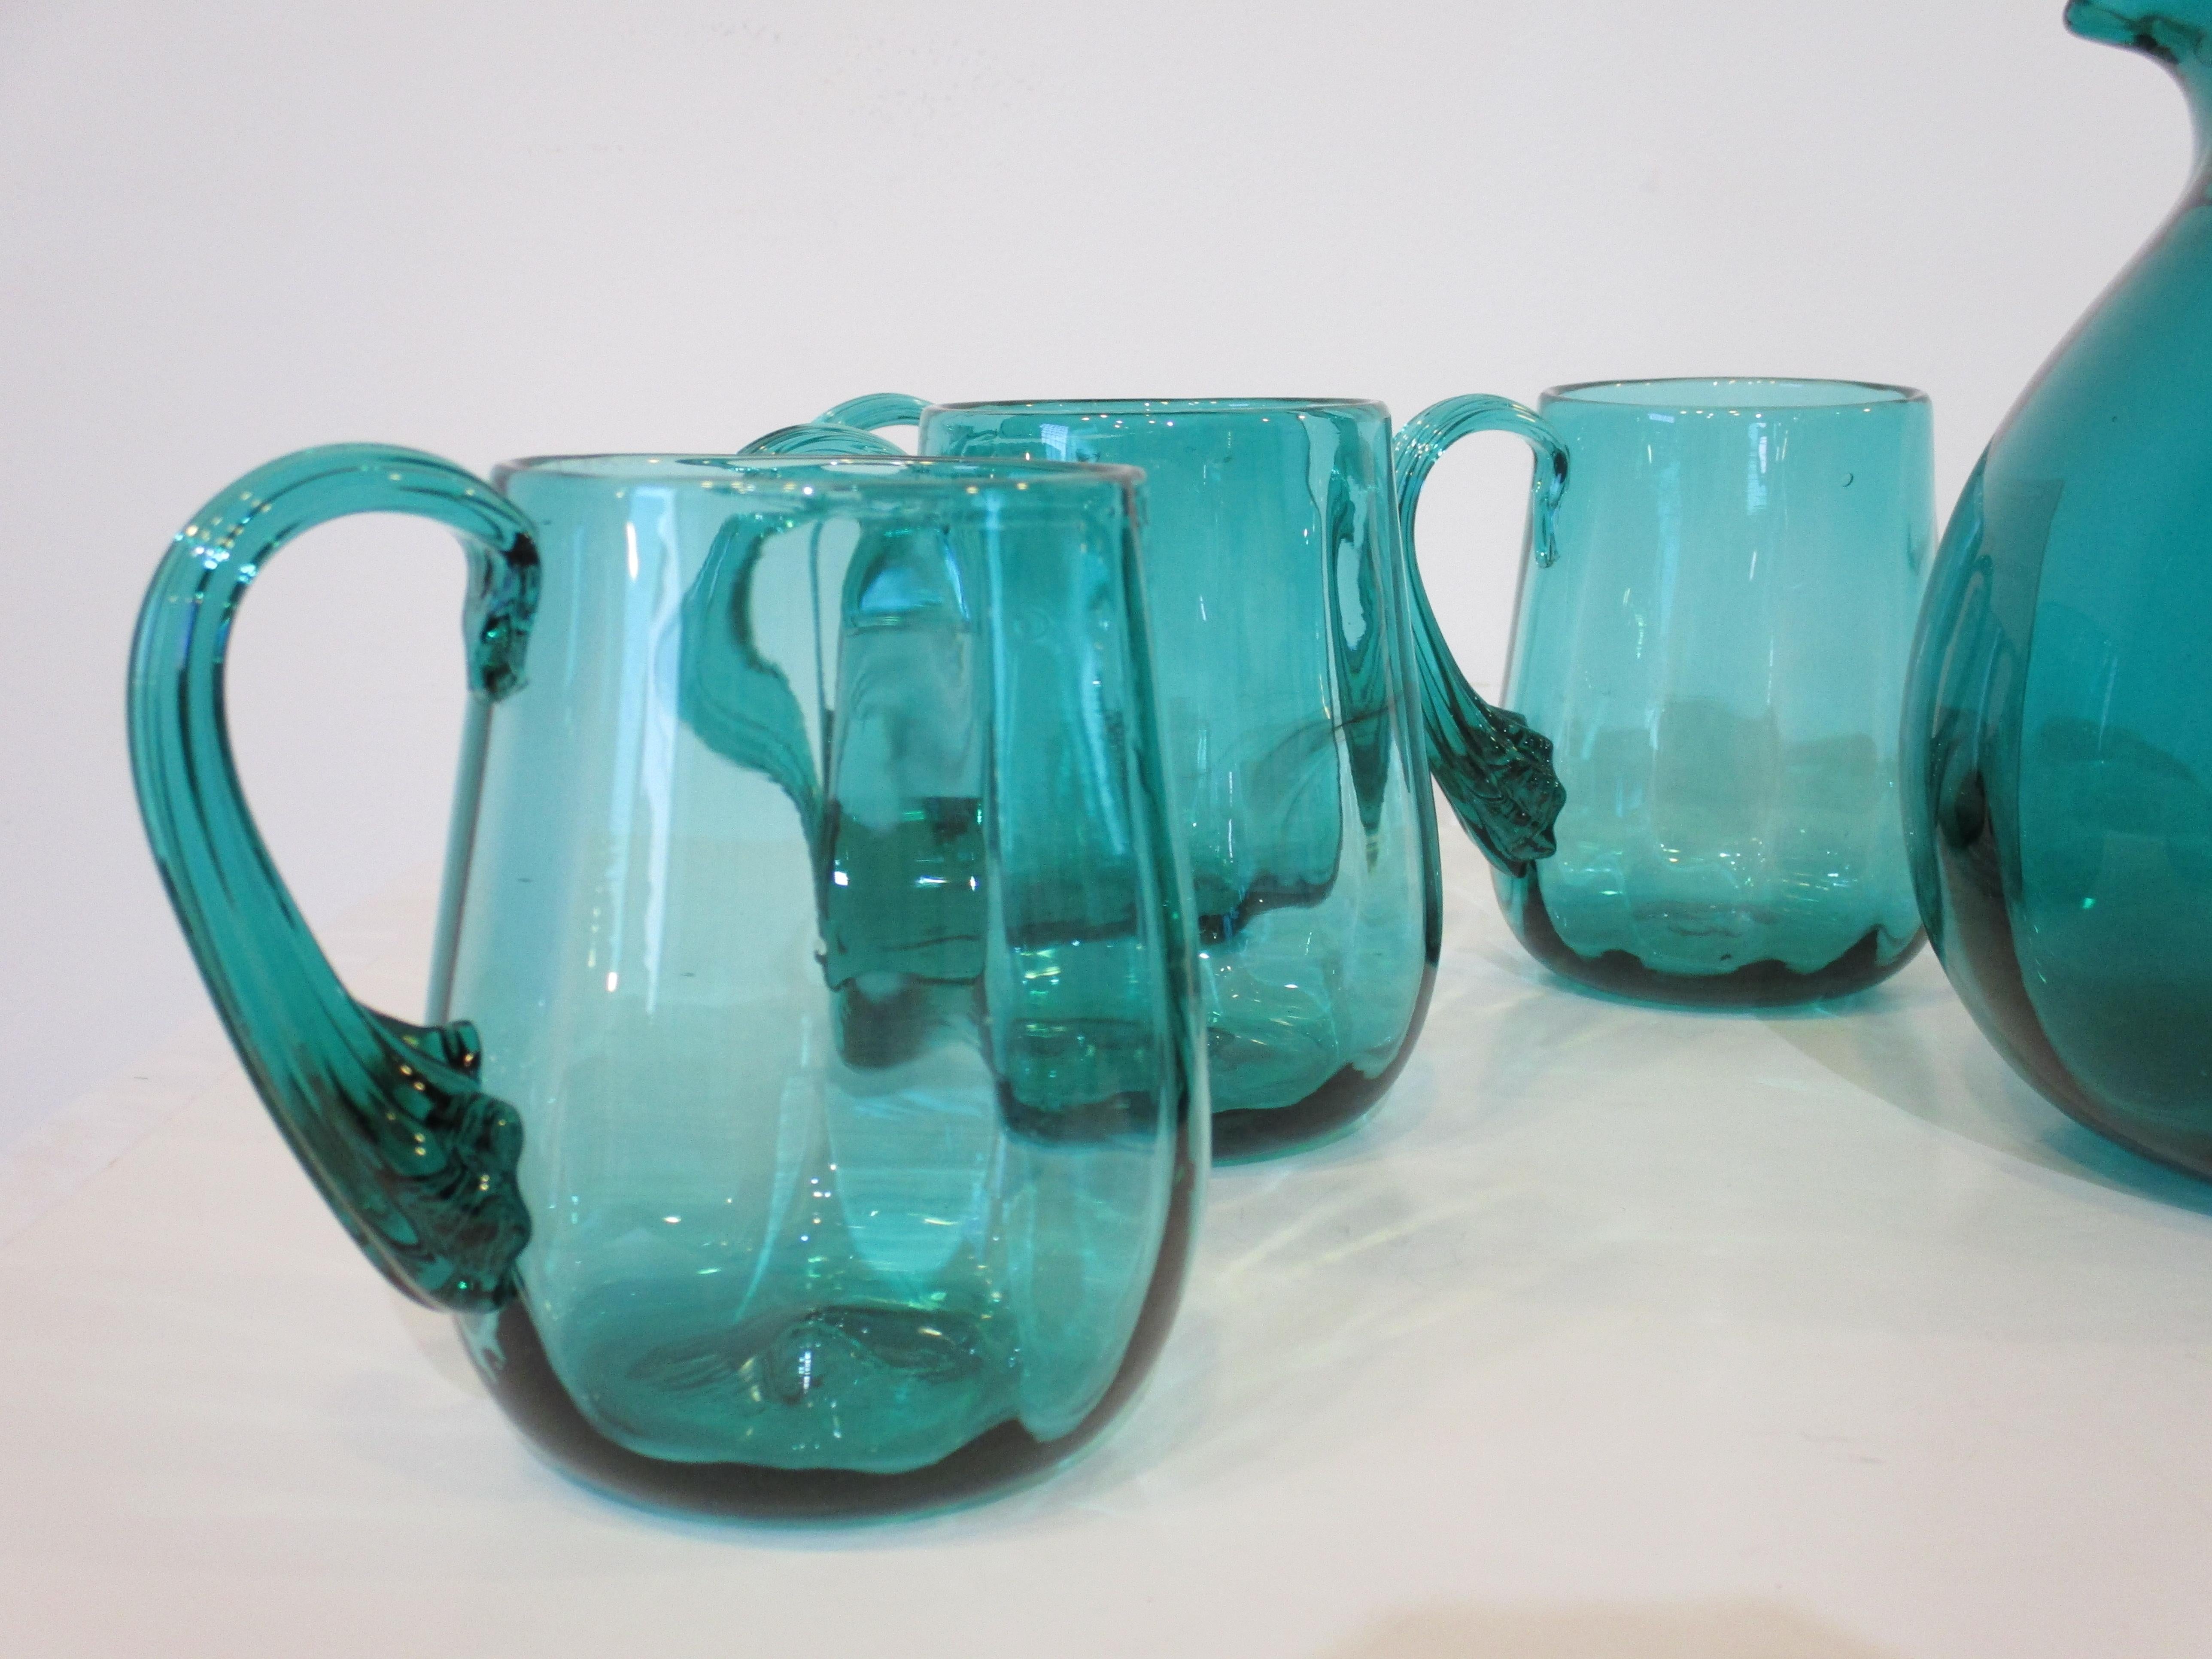 A nine piece handblown pitcher and mug set in a sea green color by noted glass artist Wayne Husted who's iconic pieces defined the Mid Century period . The mugs and pitcher have nice flowing handles with line detail perfect for that summer night